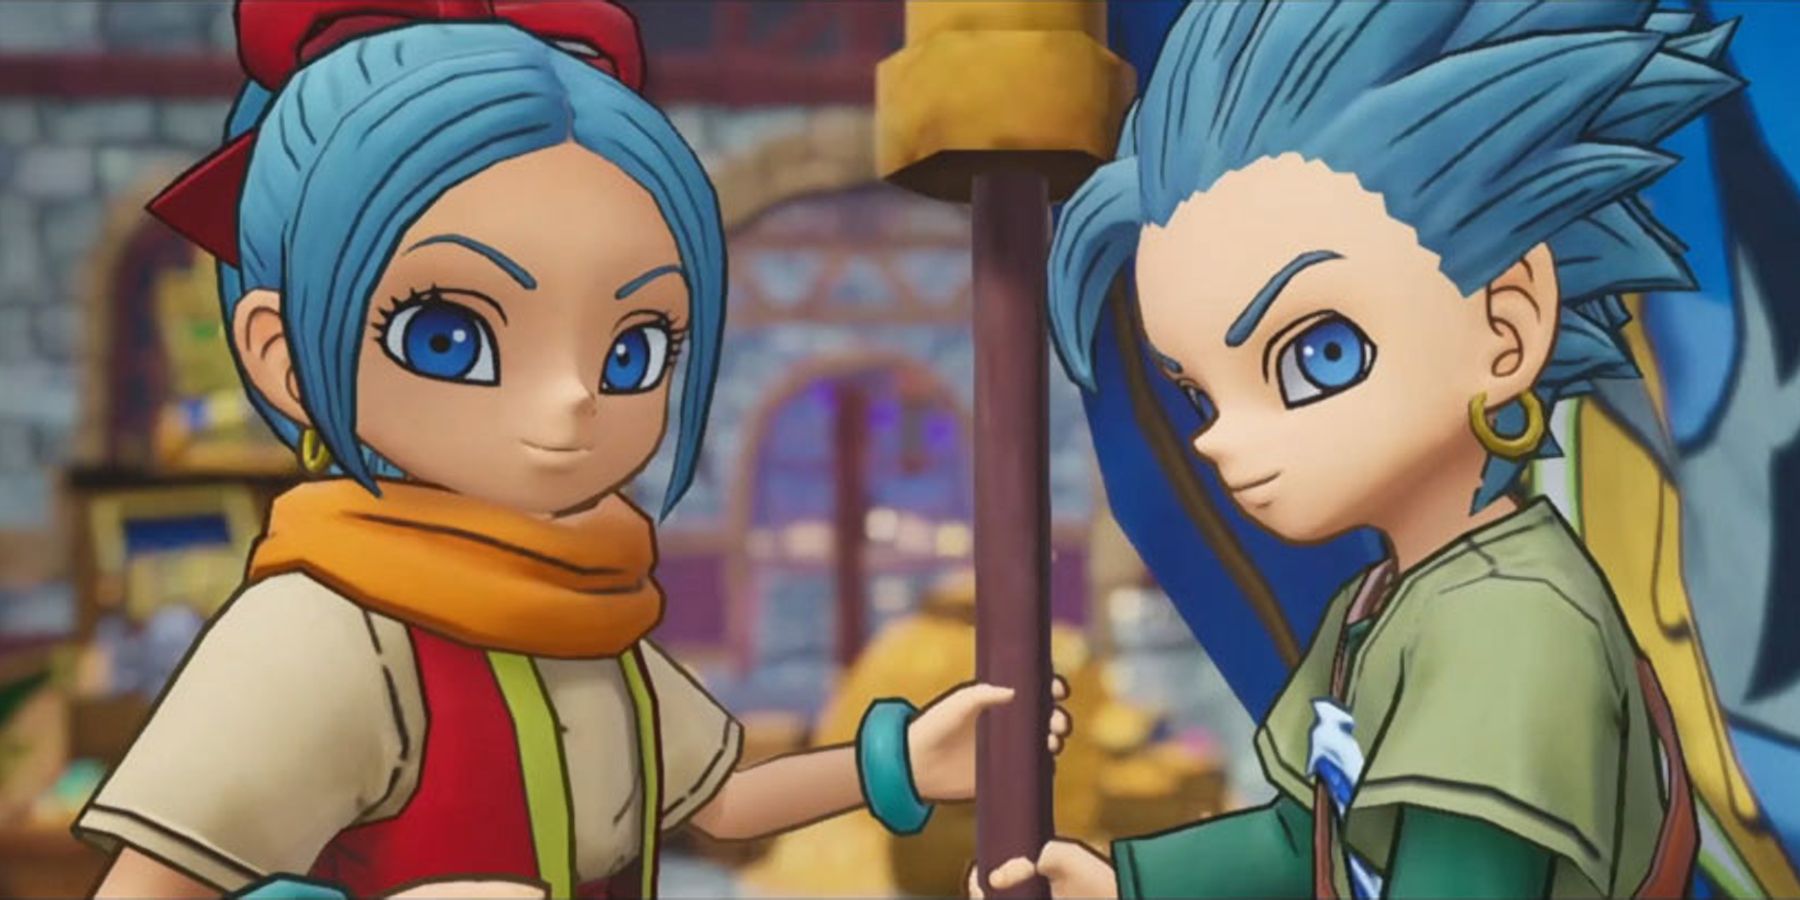 Dragon Quest XII MASSIVE Update: Multiple New DQ games coming 